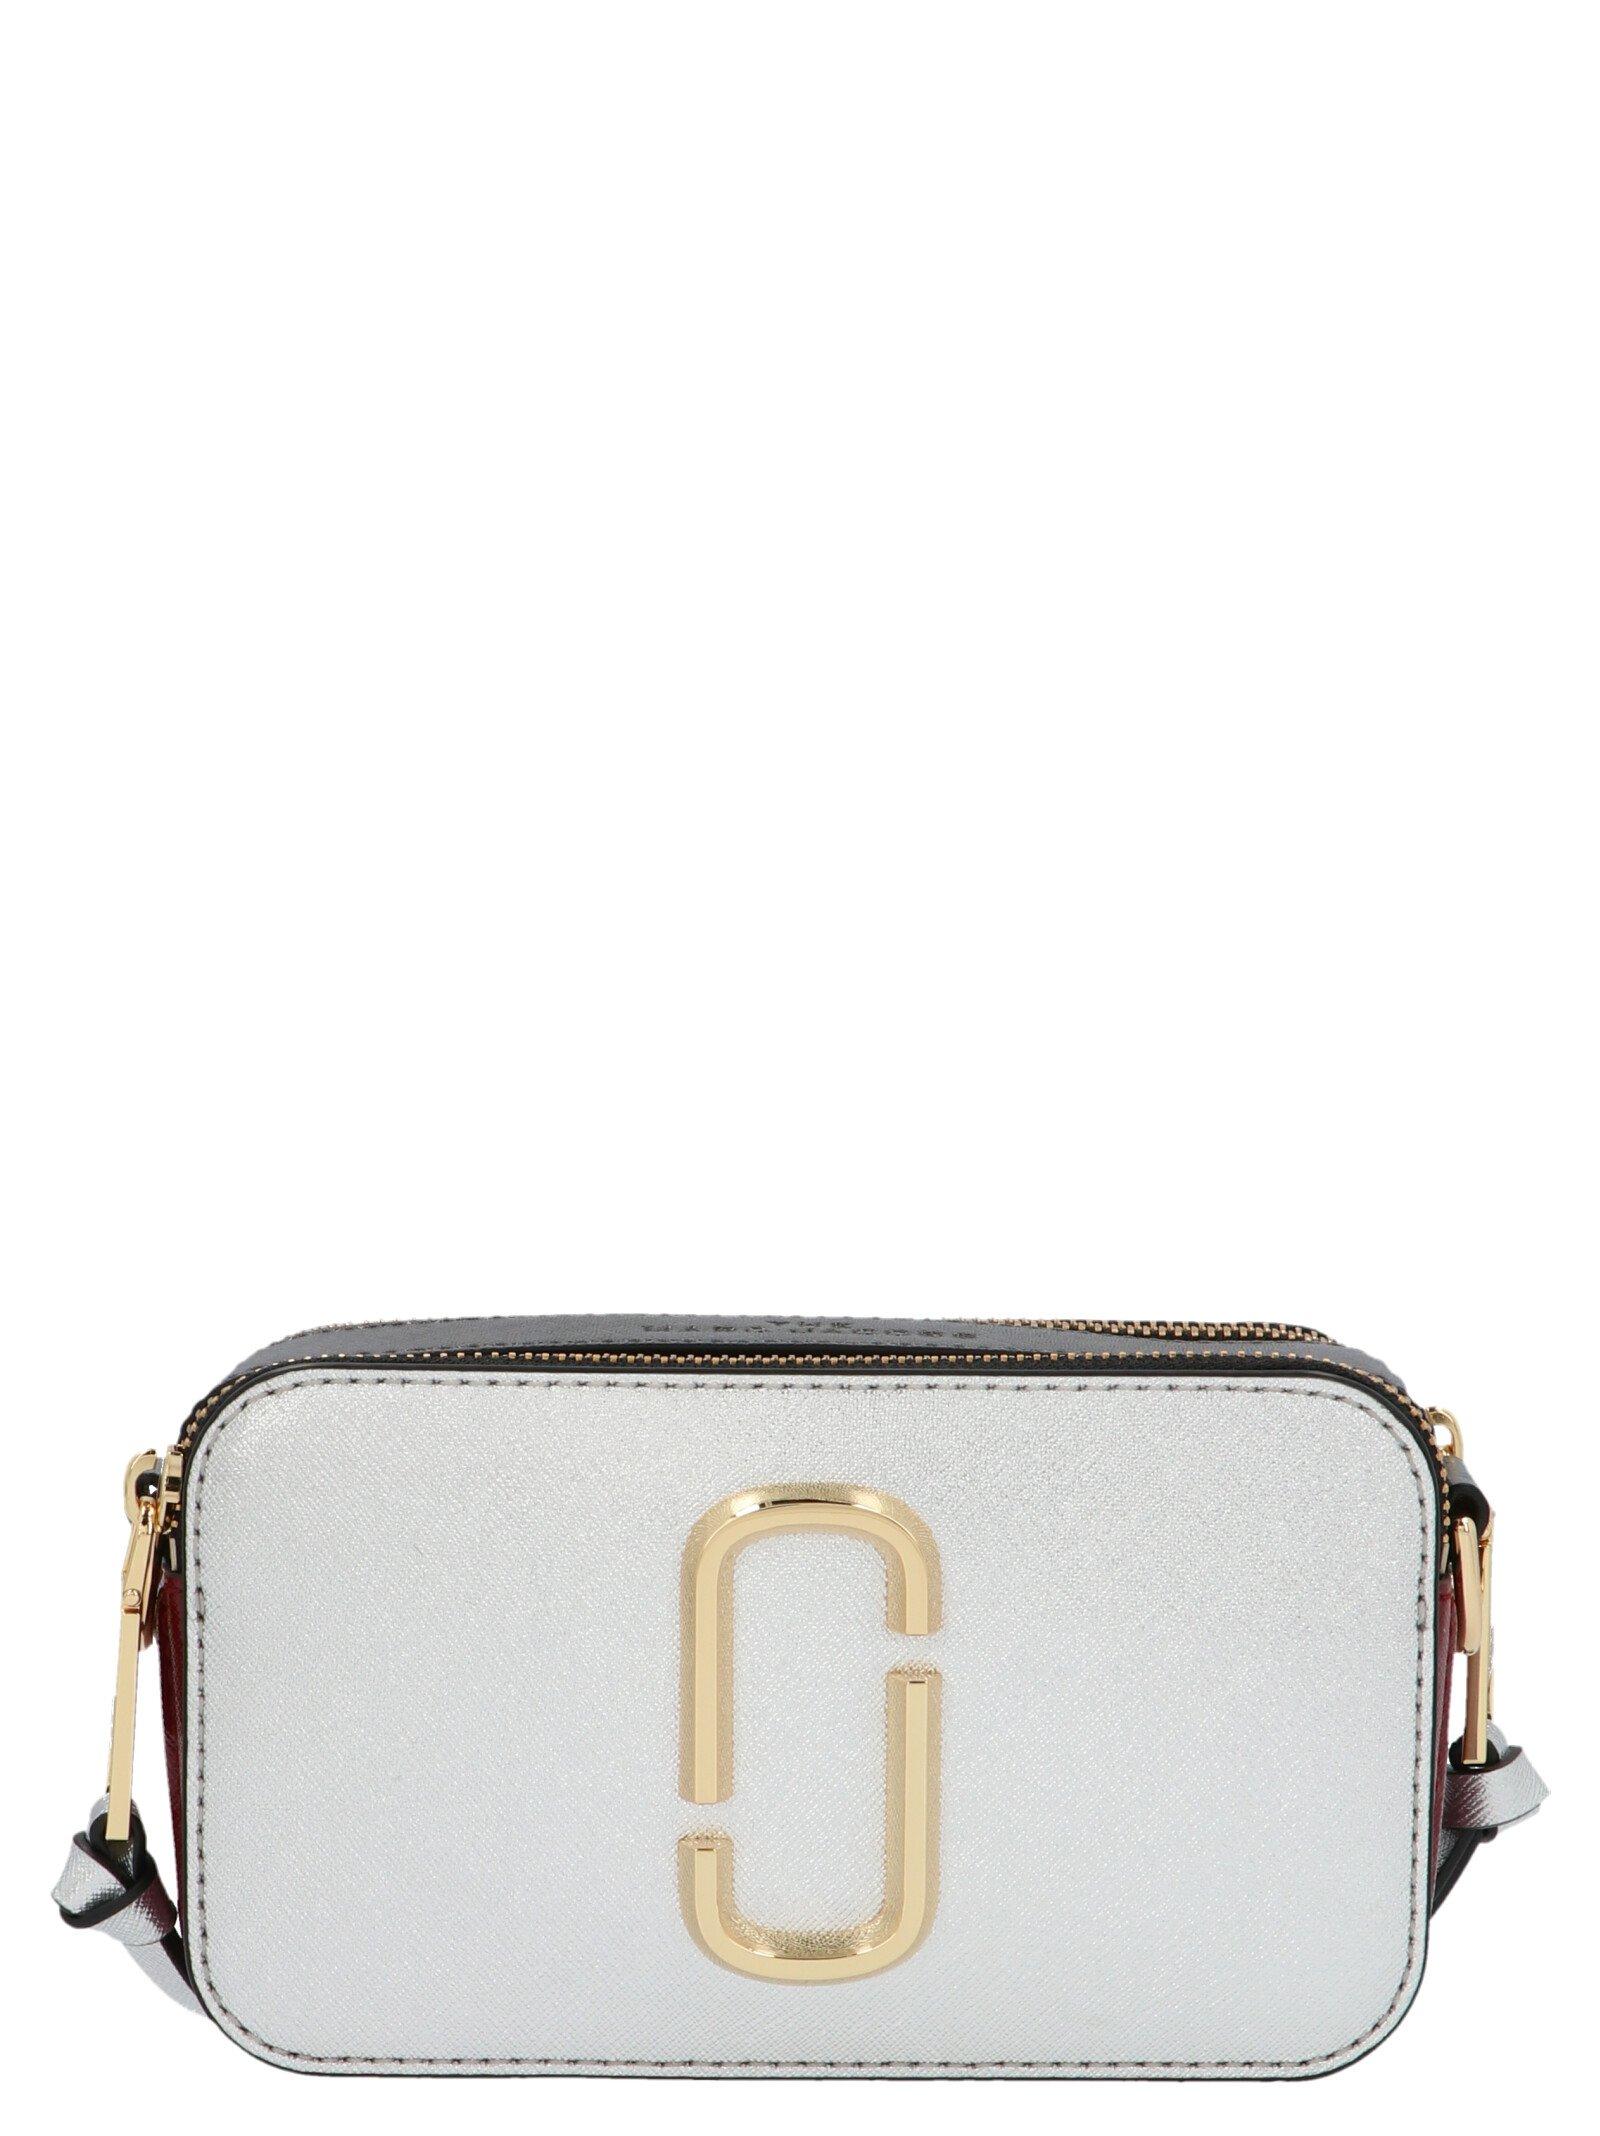 Marc Jacobs Leather The Snapshot Camera Bag in Grey (Gray) - Lyst